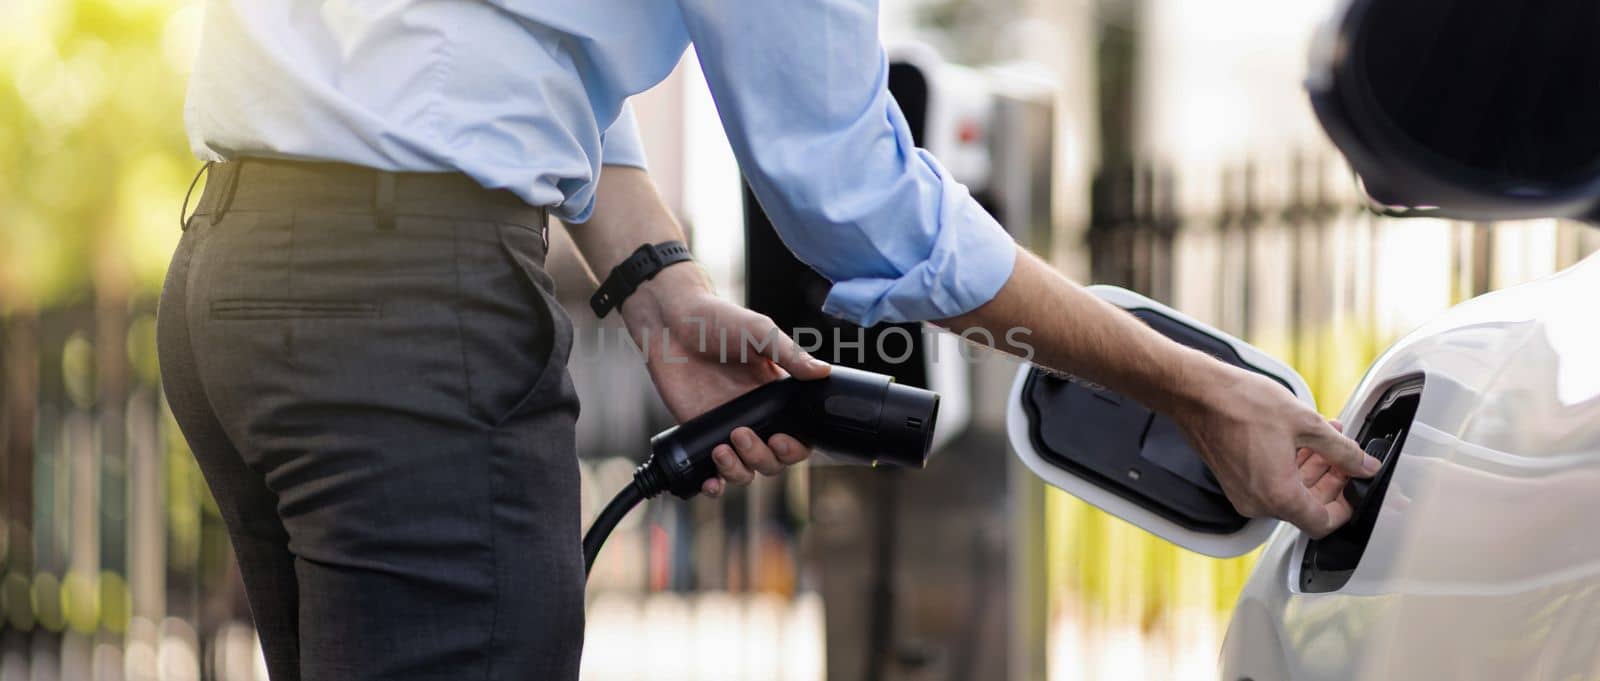 Closeup progressive man holding EV charger plug from public charging station for electric vehicle with background of residential building as concept eco-friendly sustainability energy car concept.